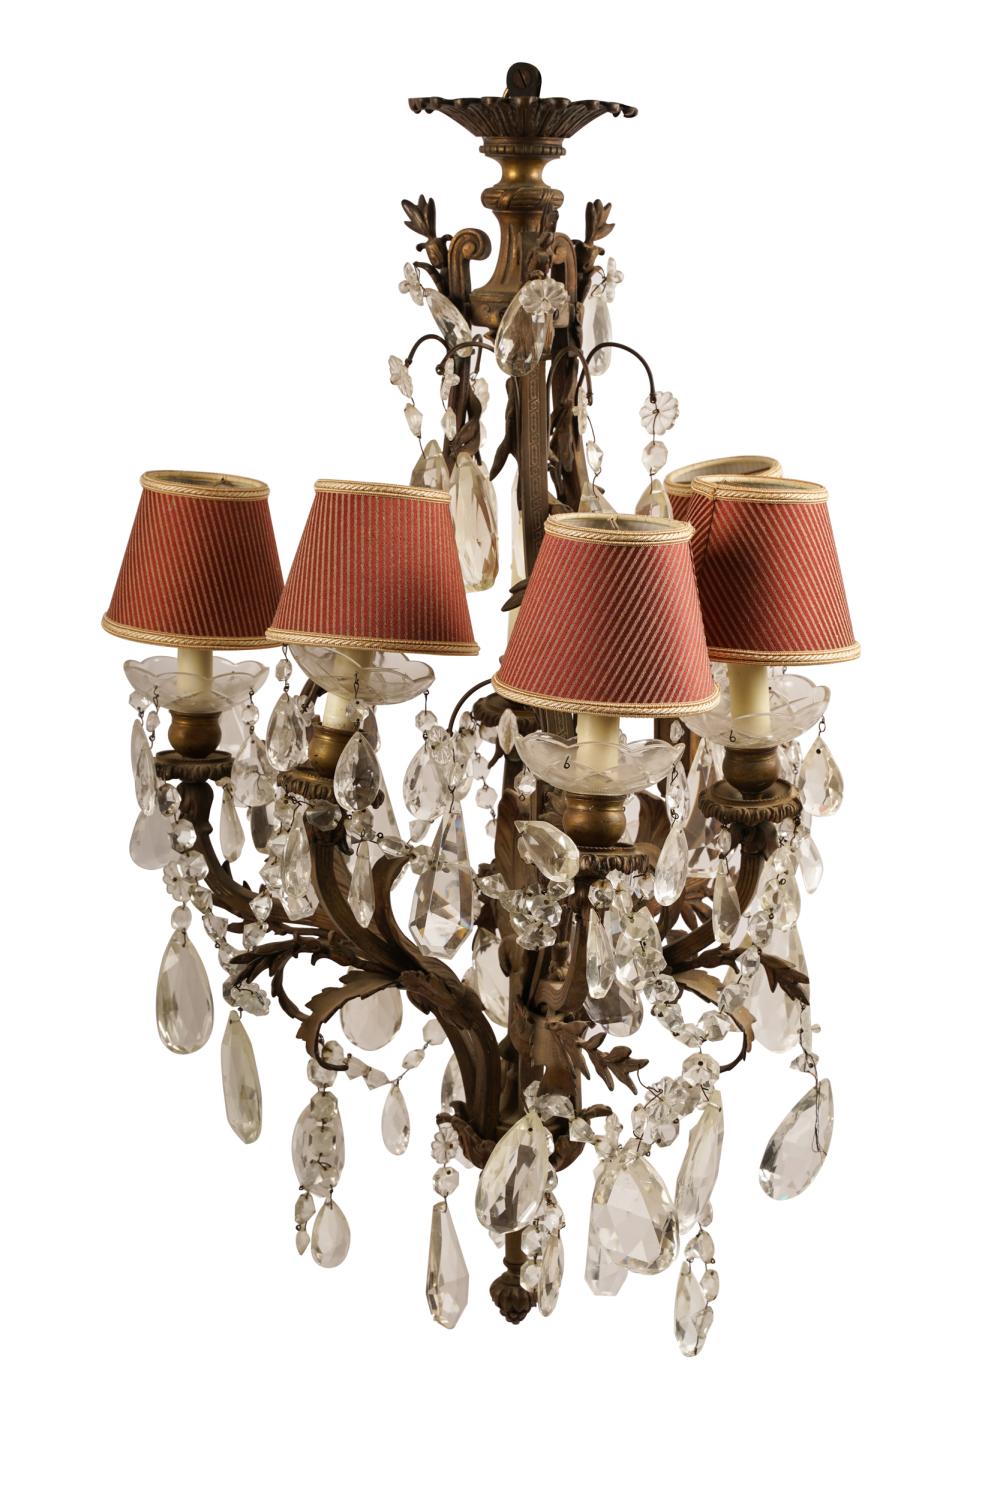 FRENCH BRONZE CRYSTAL CHANDELIERwith 332ece